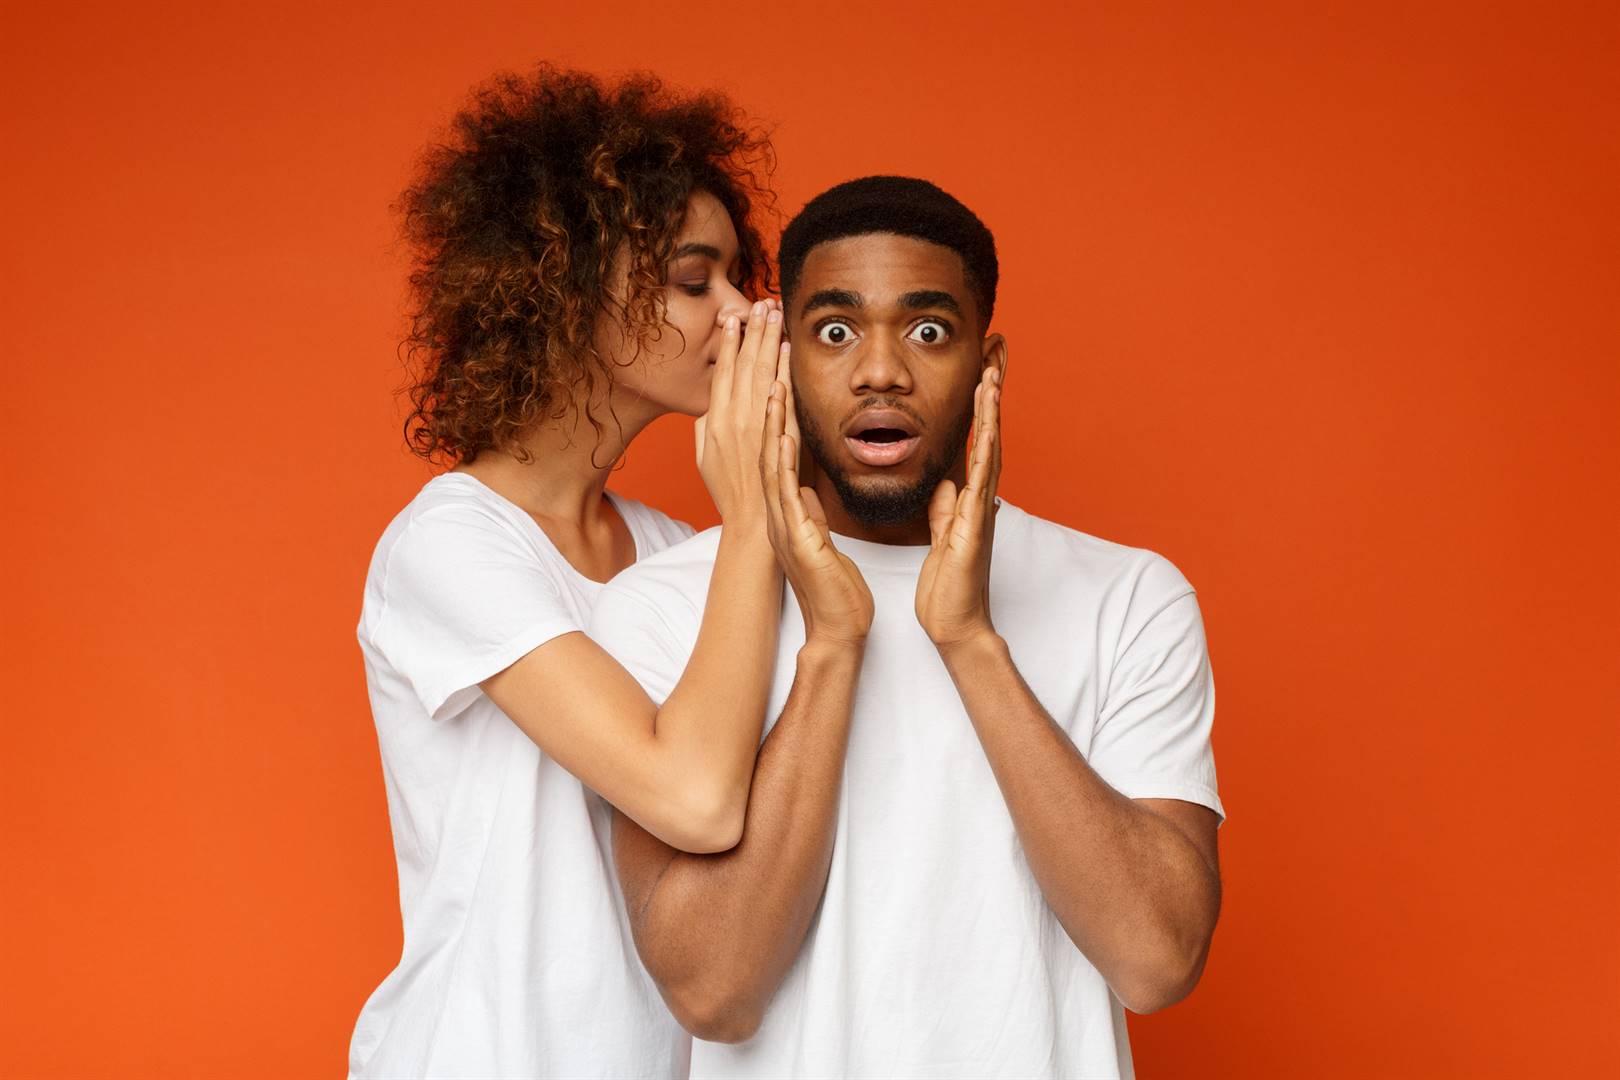 There are many differences between sexual partners, but cultivating good communication allows us to use these differences to our benefit rather than our peril. Picture: iStock/Gallo Images